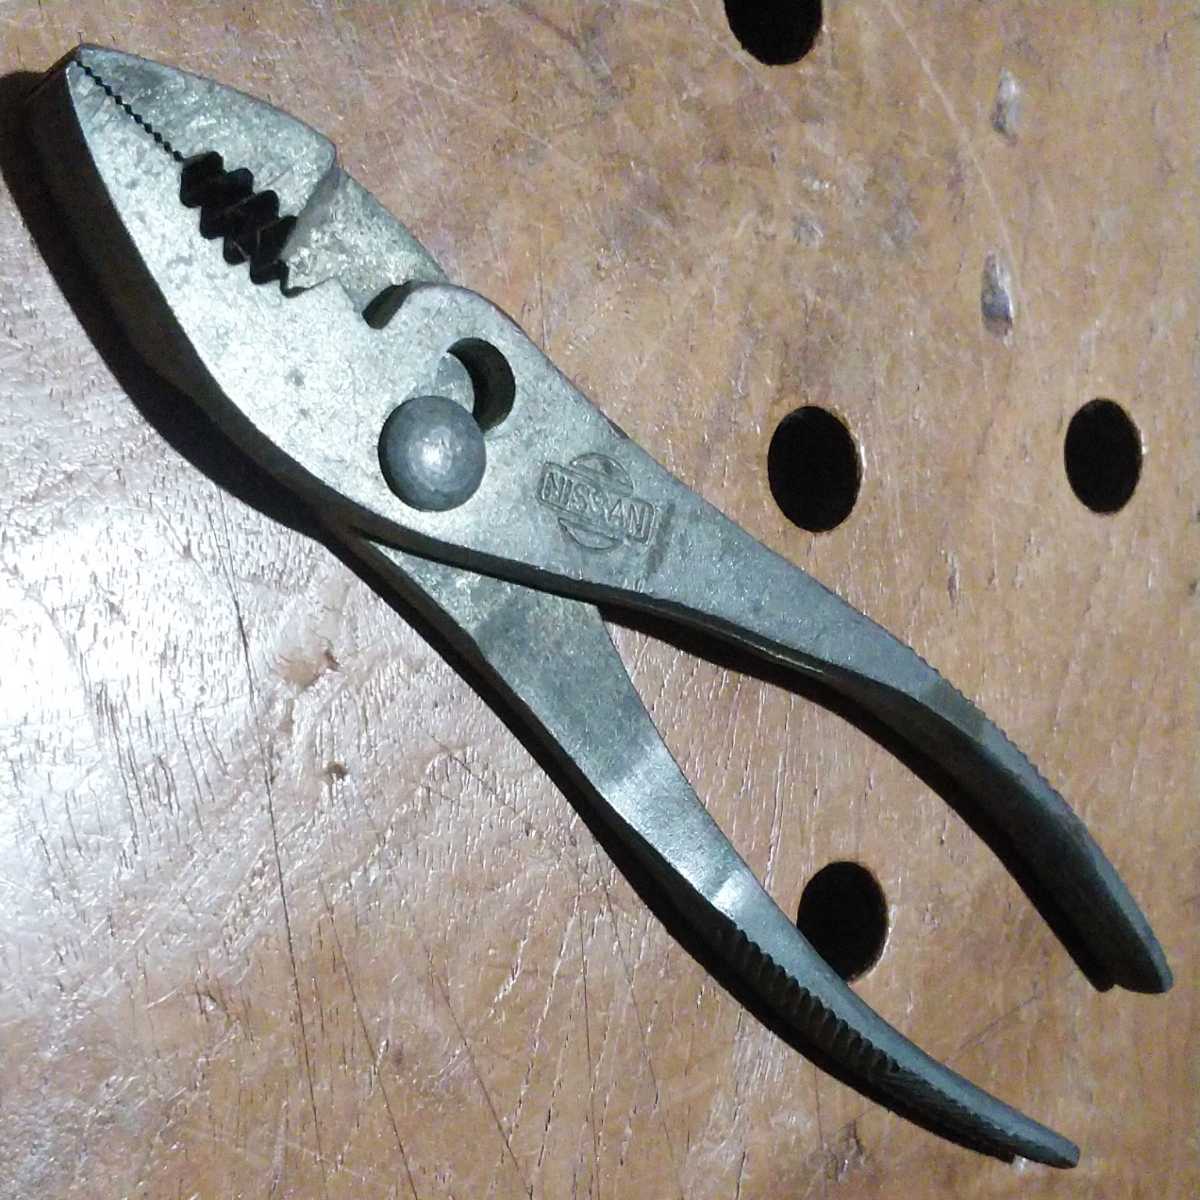  Nissan automobile NISSAN loaded tool maintenance for tool plier total length 154.2mm Datsun datsun Plier considerably old is good structure .GT-R GT-S4